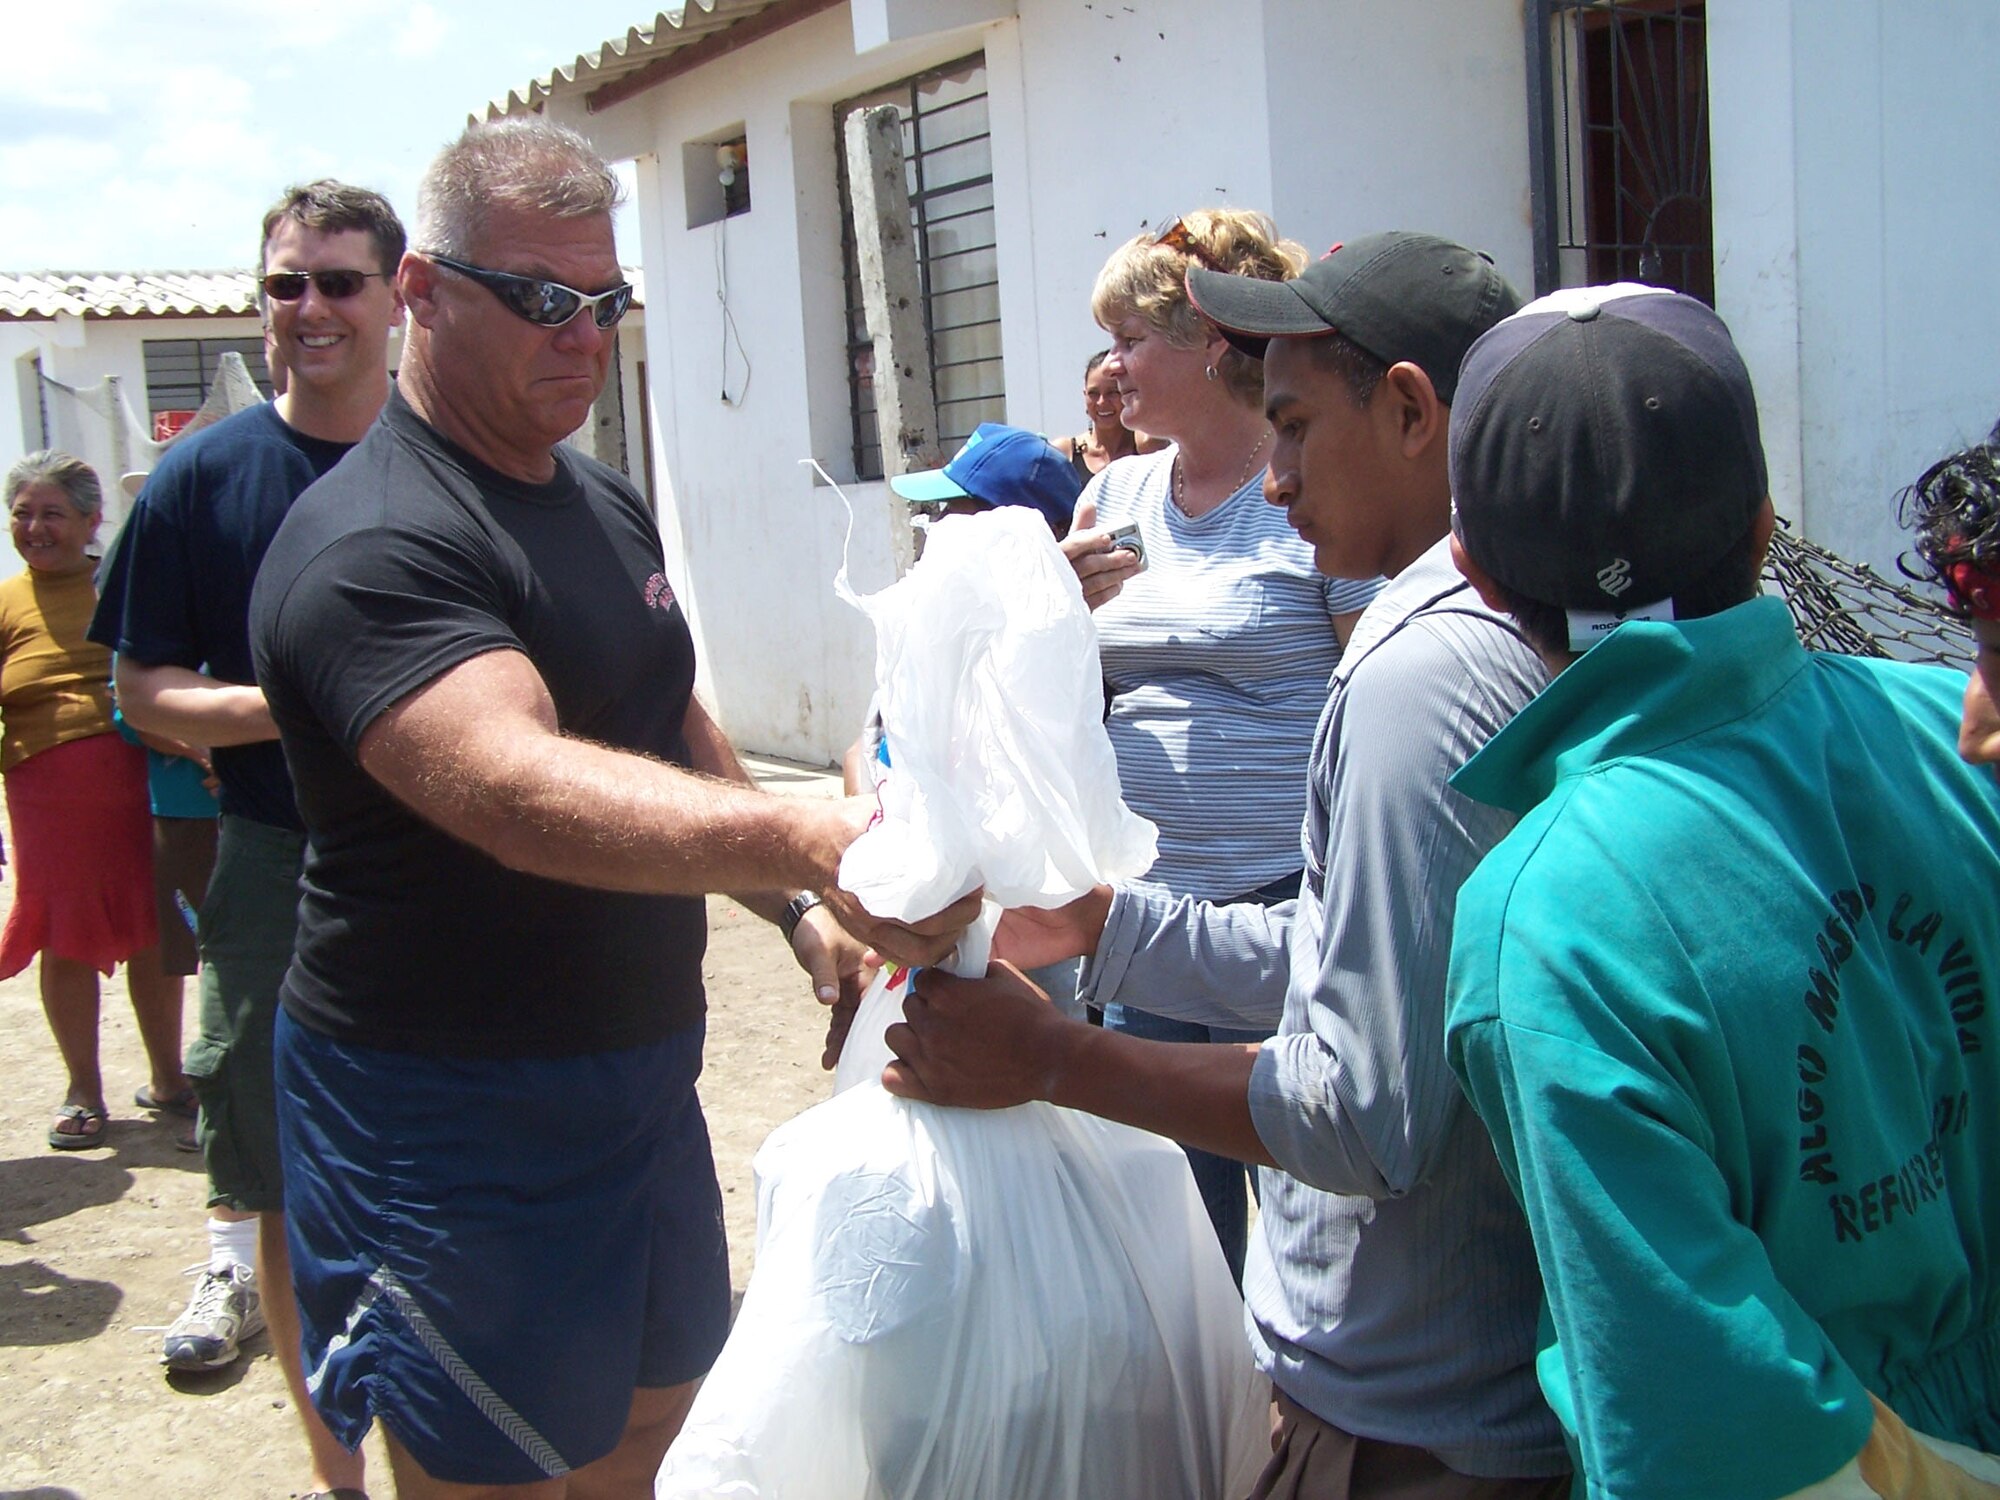 Chief Master Sgt. Bruce Nicholson hands out compassion packages to residents of the Manta City Dump in Ecuador. He is assigned to the Air National Guard's 157th Air Refueling Wing at Pease, N.H. (U.S. Air Force photo/Maj. Chris Hemrick) 

